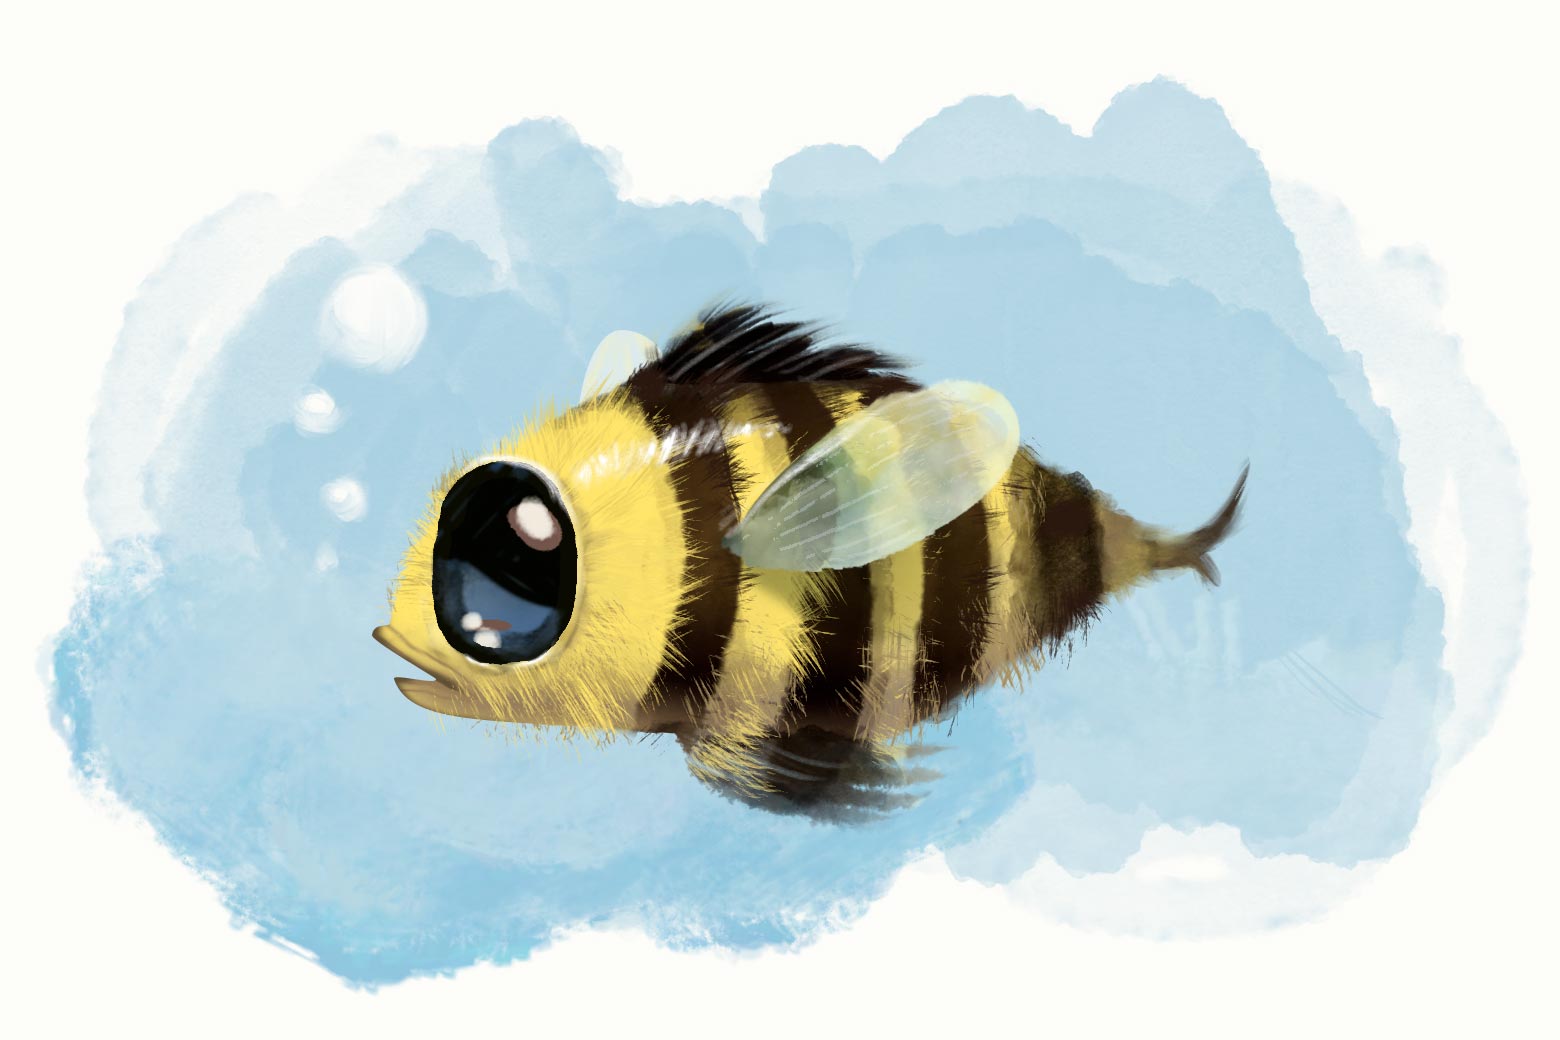 An illustration of a hybrid bee fish creature with a watery background. There are bubbles floating up from the creature's mouth.